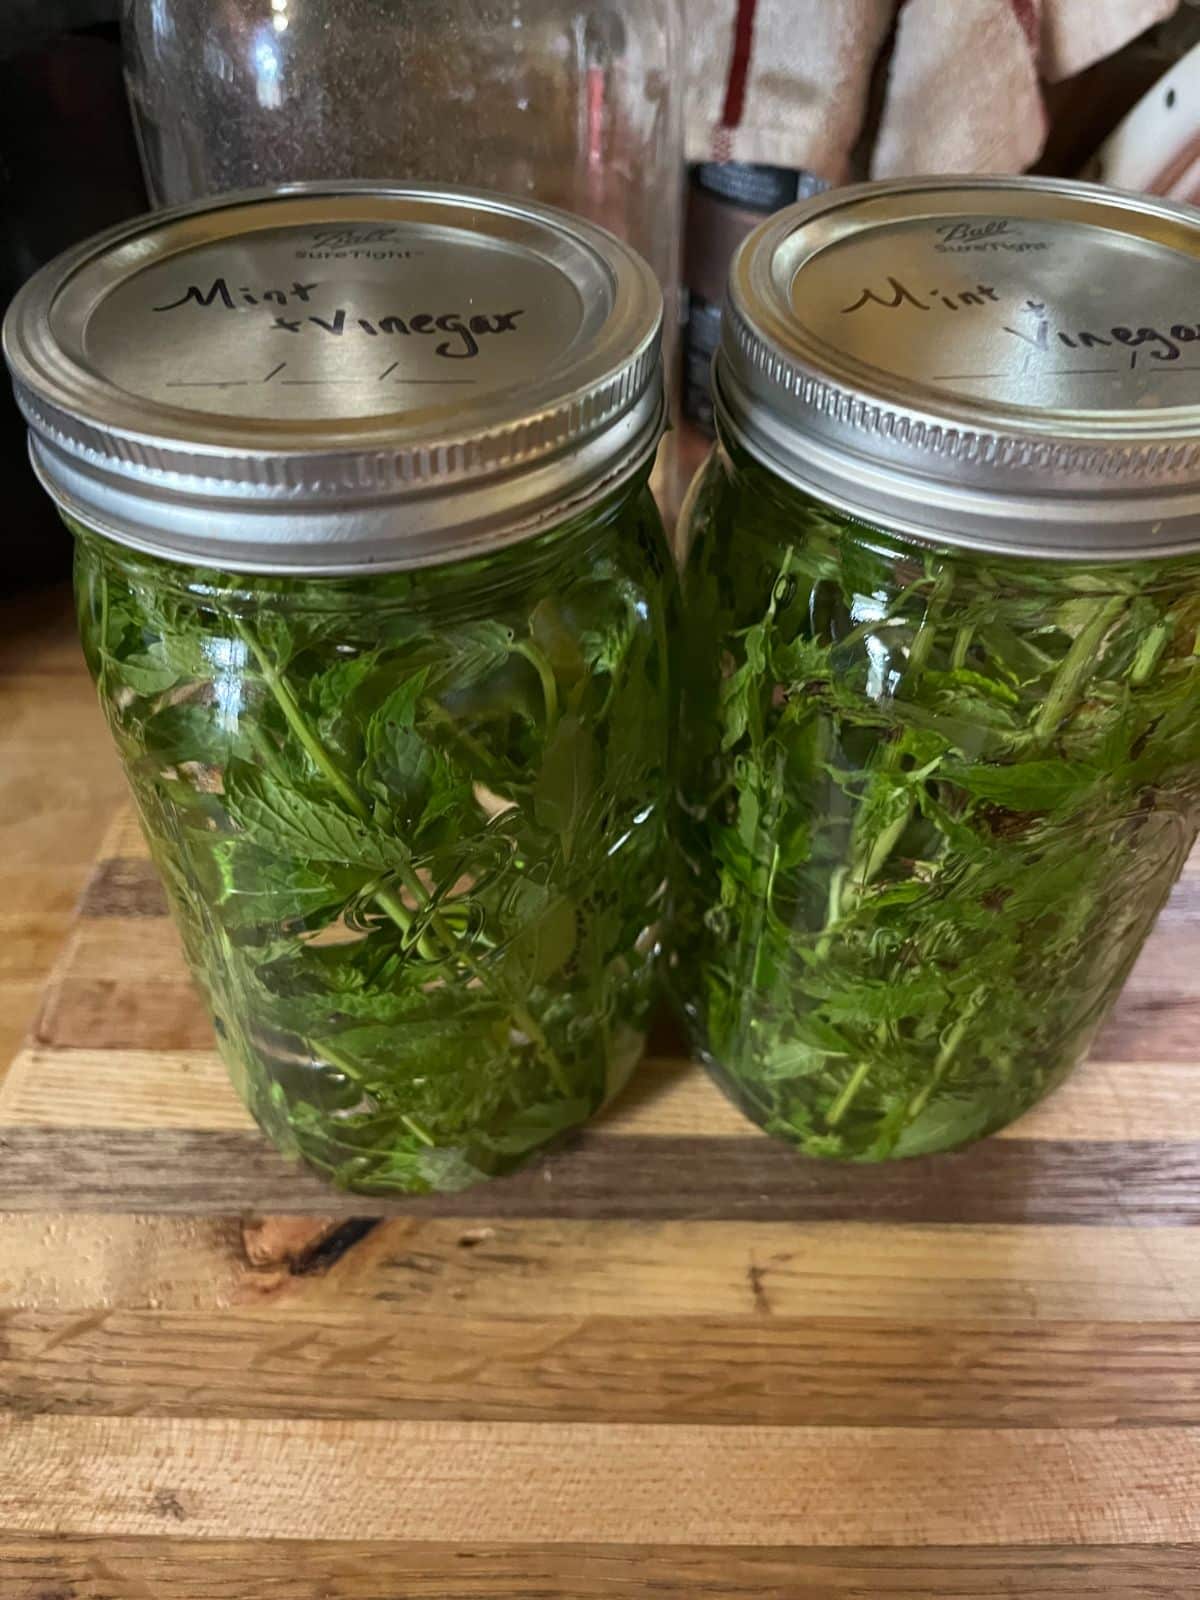 Jars of vinegar being infused with fresh mint